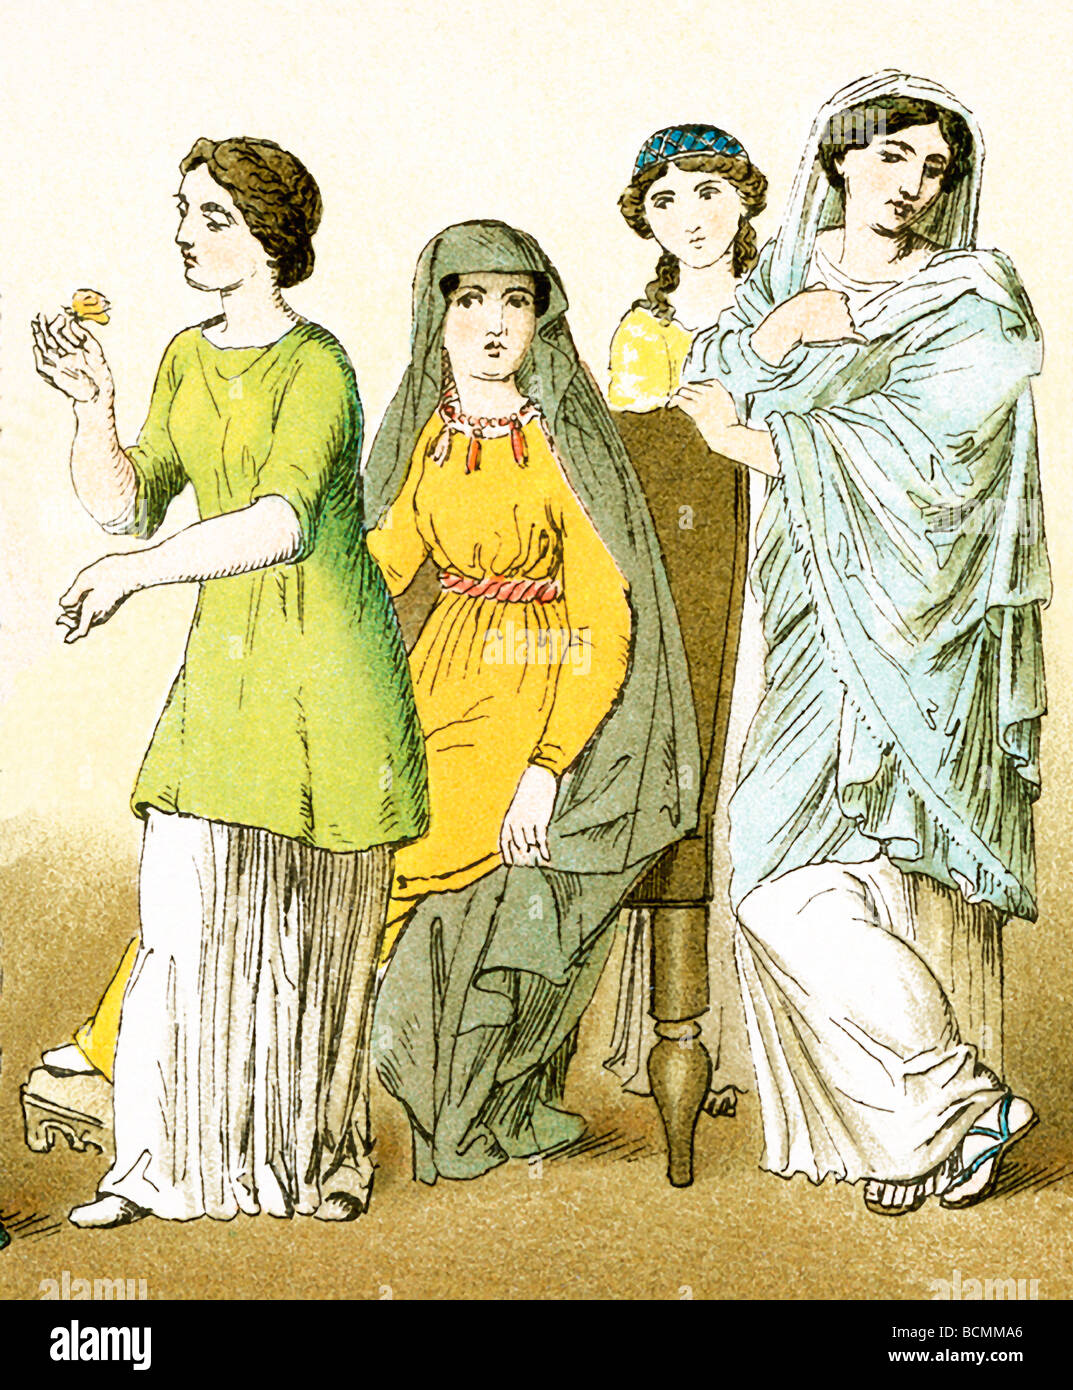 The figures represent four ancient Roman women. The illustration dates to 1882. Stock Photo